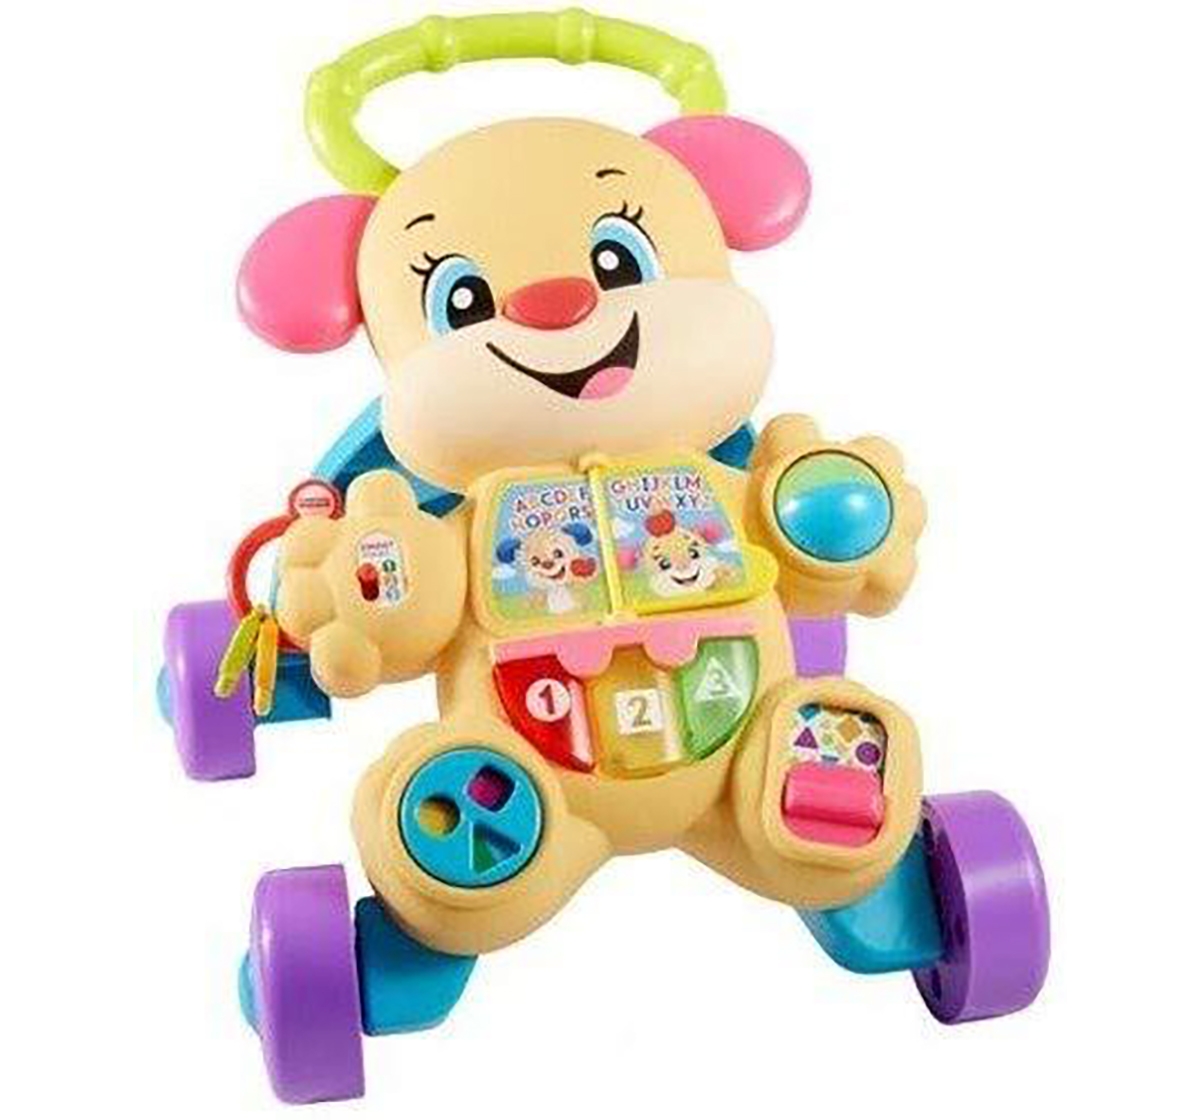 Fisher-Price | Fisher Price Laugh And Learn Smart Stages Learn With Sis Walker, Multi Color Baby Gear for Kids age 6M+ 7